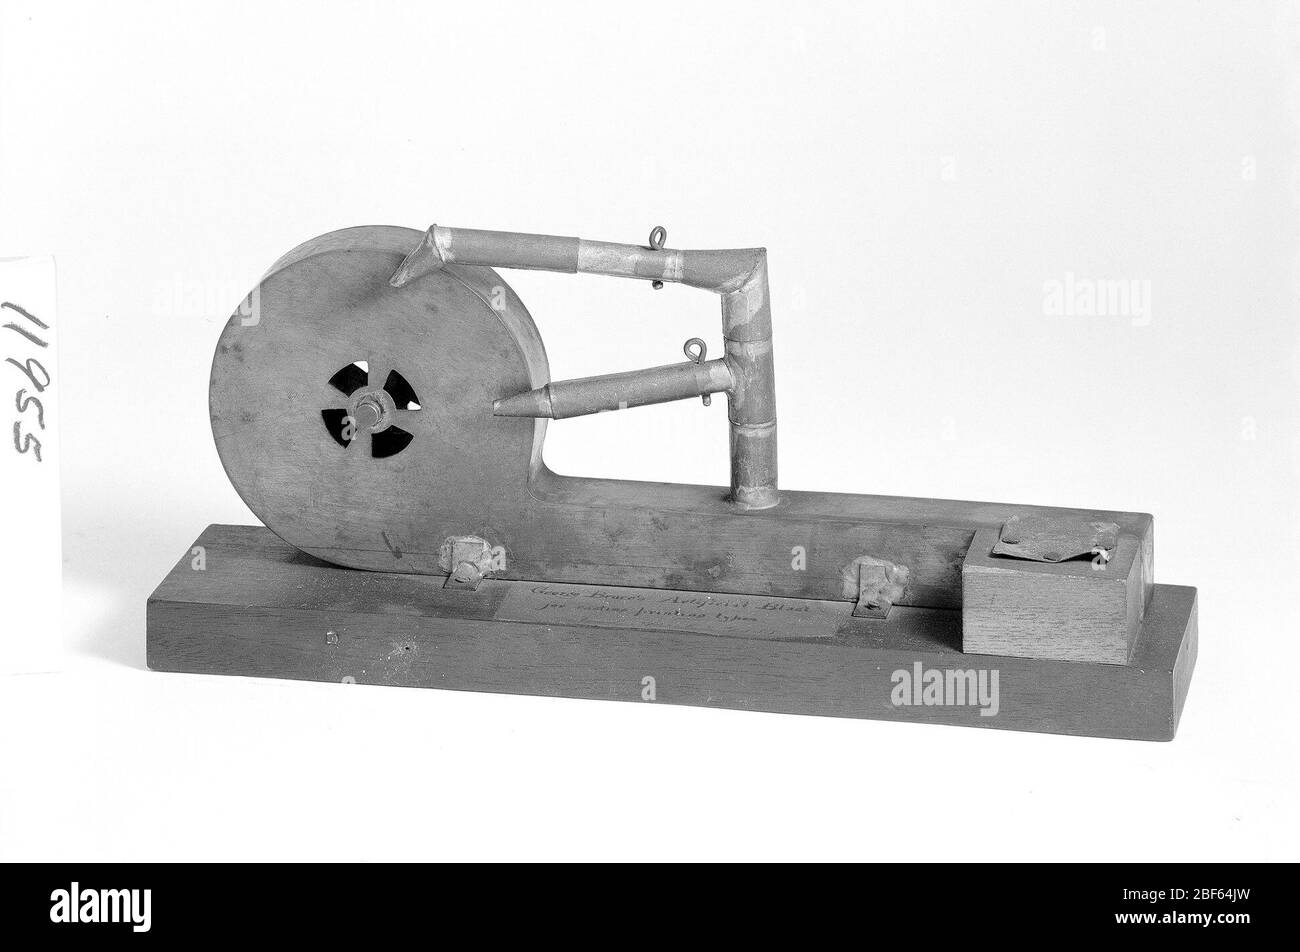 Patent Model for an Artificial Blast for Typecasting Machines. This patent model demonstrates an invention for an artificial blast for typecasting machines; the invention was granted patent number 11955. This device was intended for small type molds, which were apt to overheat at fast casting rates. Stock Photo